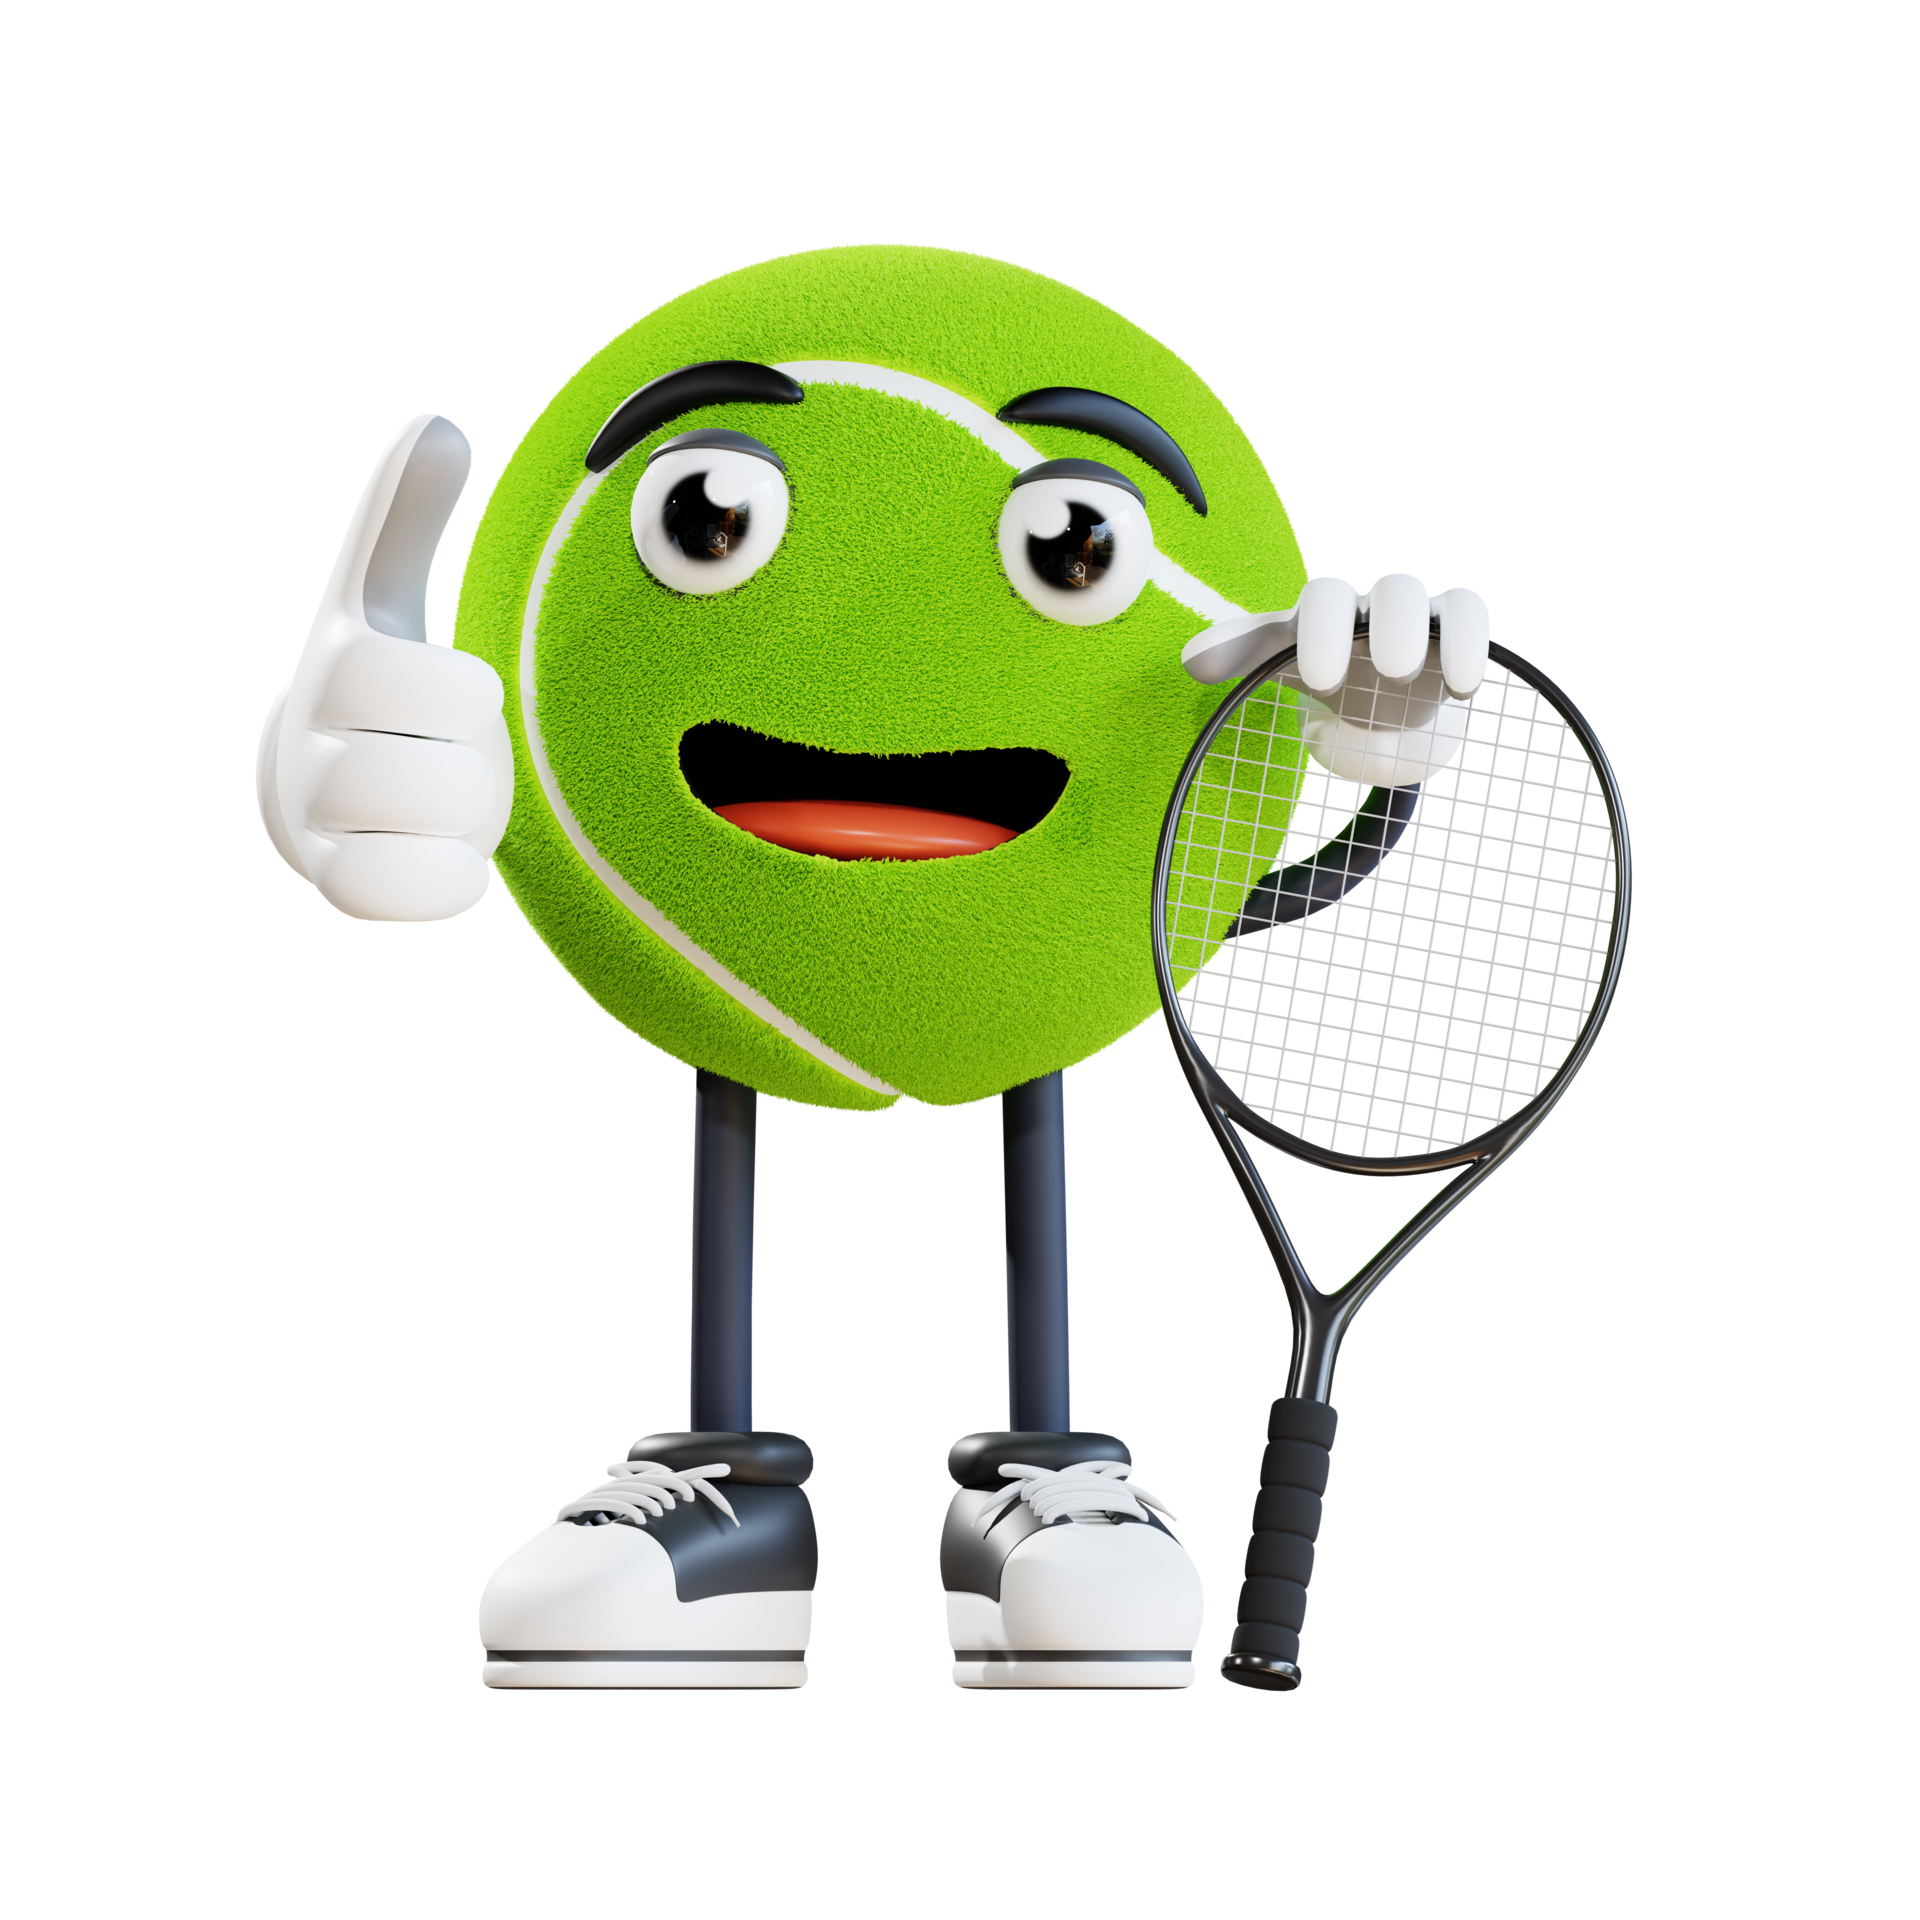 https://static.vecteezy.com/system/resources/previews/011/356/195/original/tennis-ball-mascot-giving-thumbs-up-3d-character-illustration-png.png